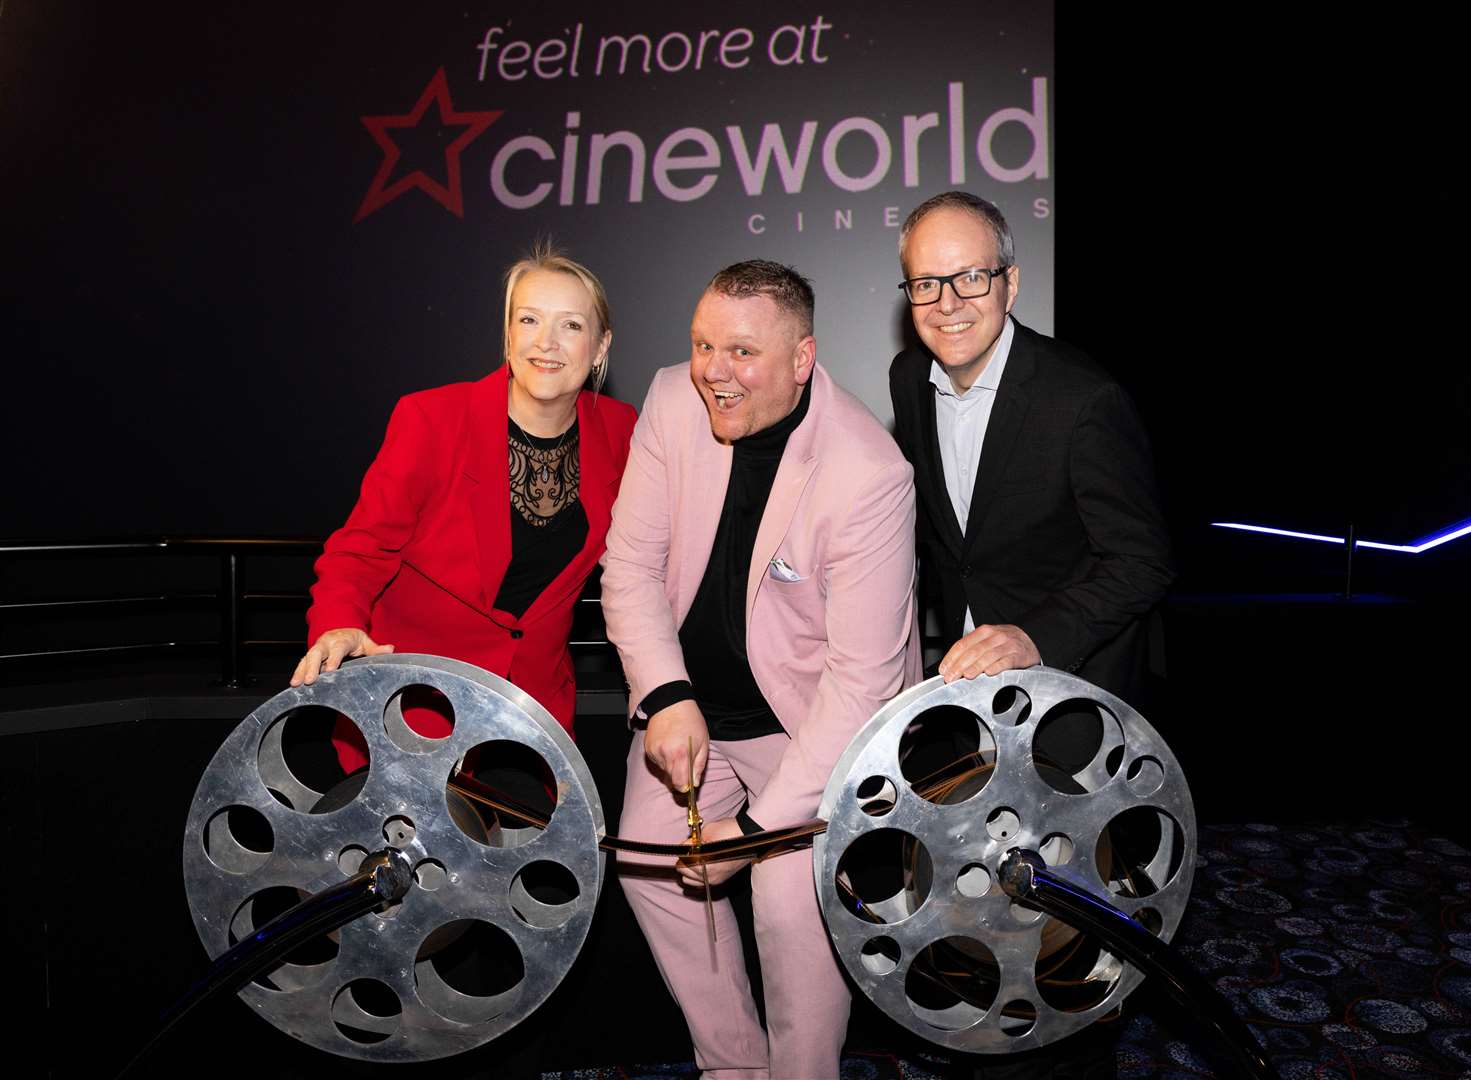 Kelly Drew, Cineworld Operations Director with Ashford's General Manager Gary Cork and John Schreiner, IMAX SVP, Theatre Development cutting the ribbon. Picture: Andrew Fosker / PinPep